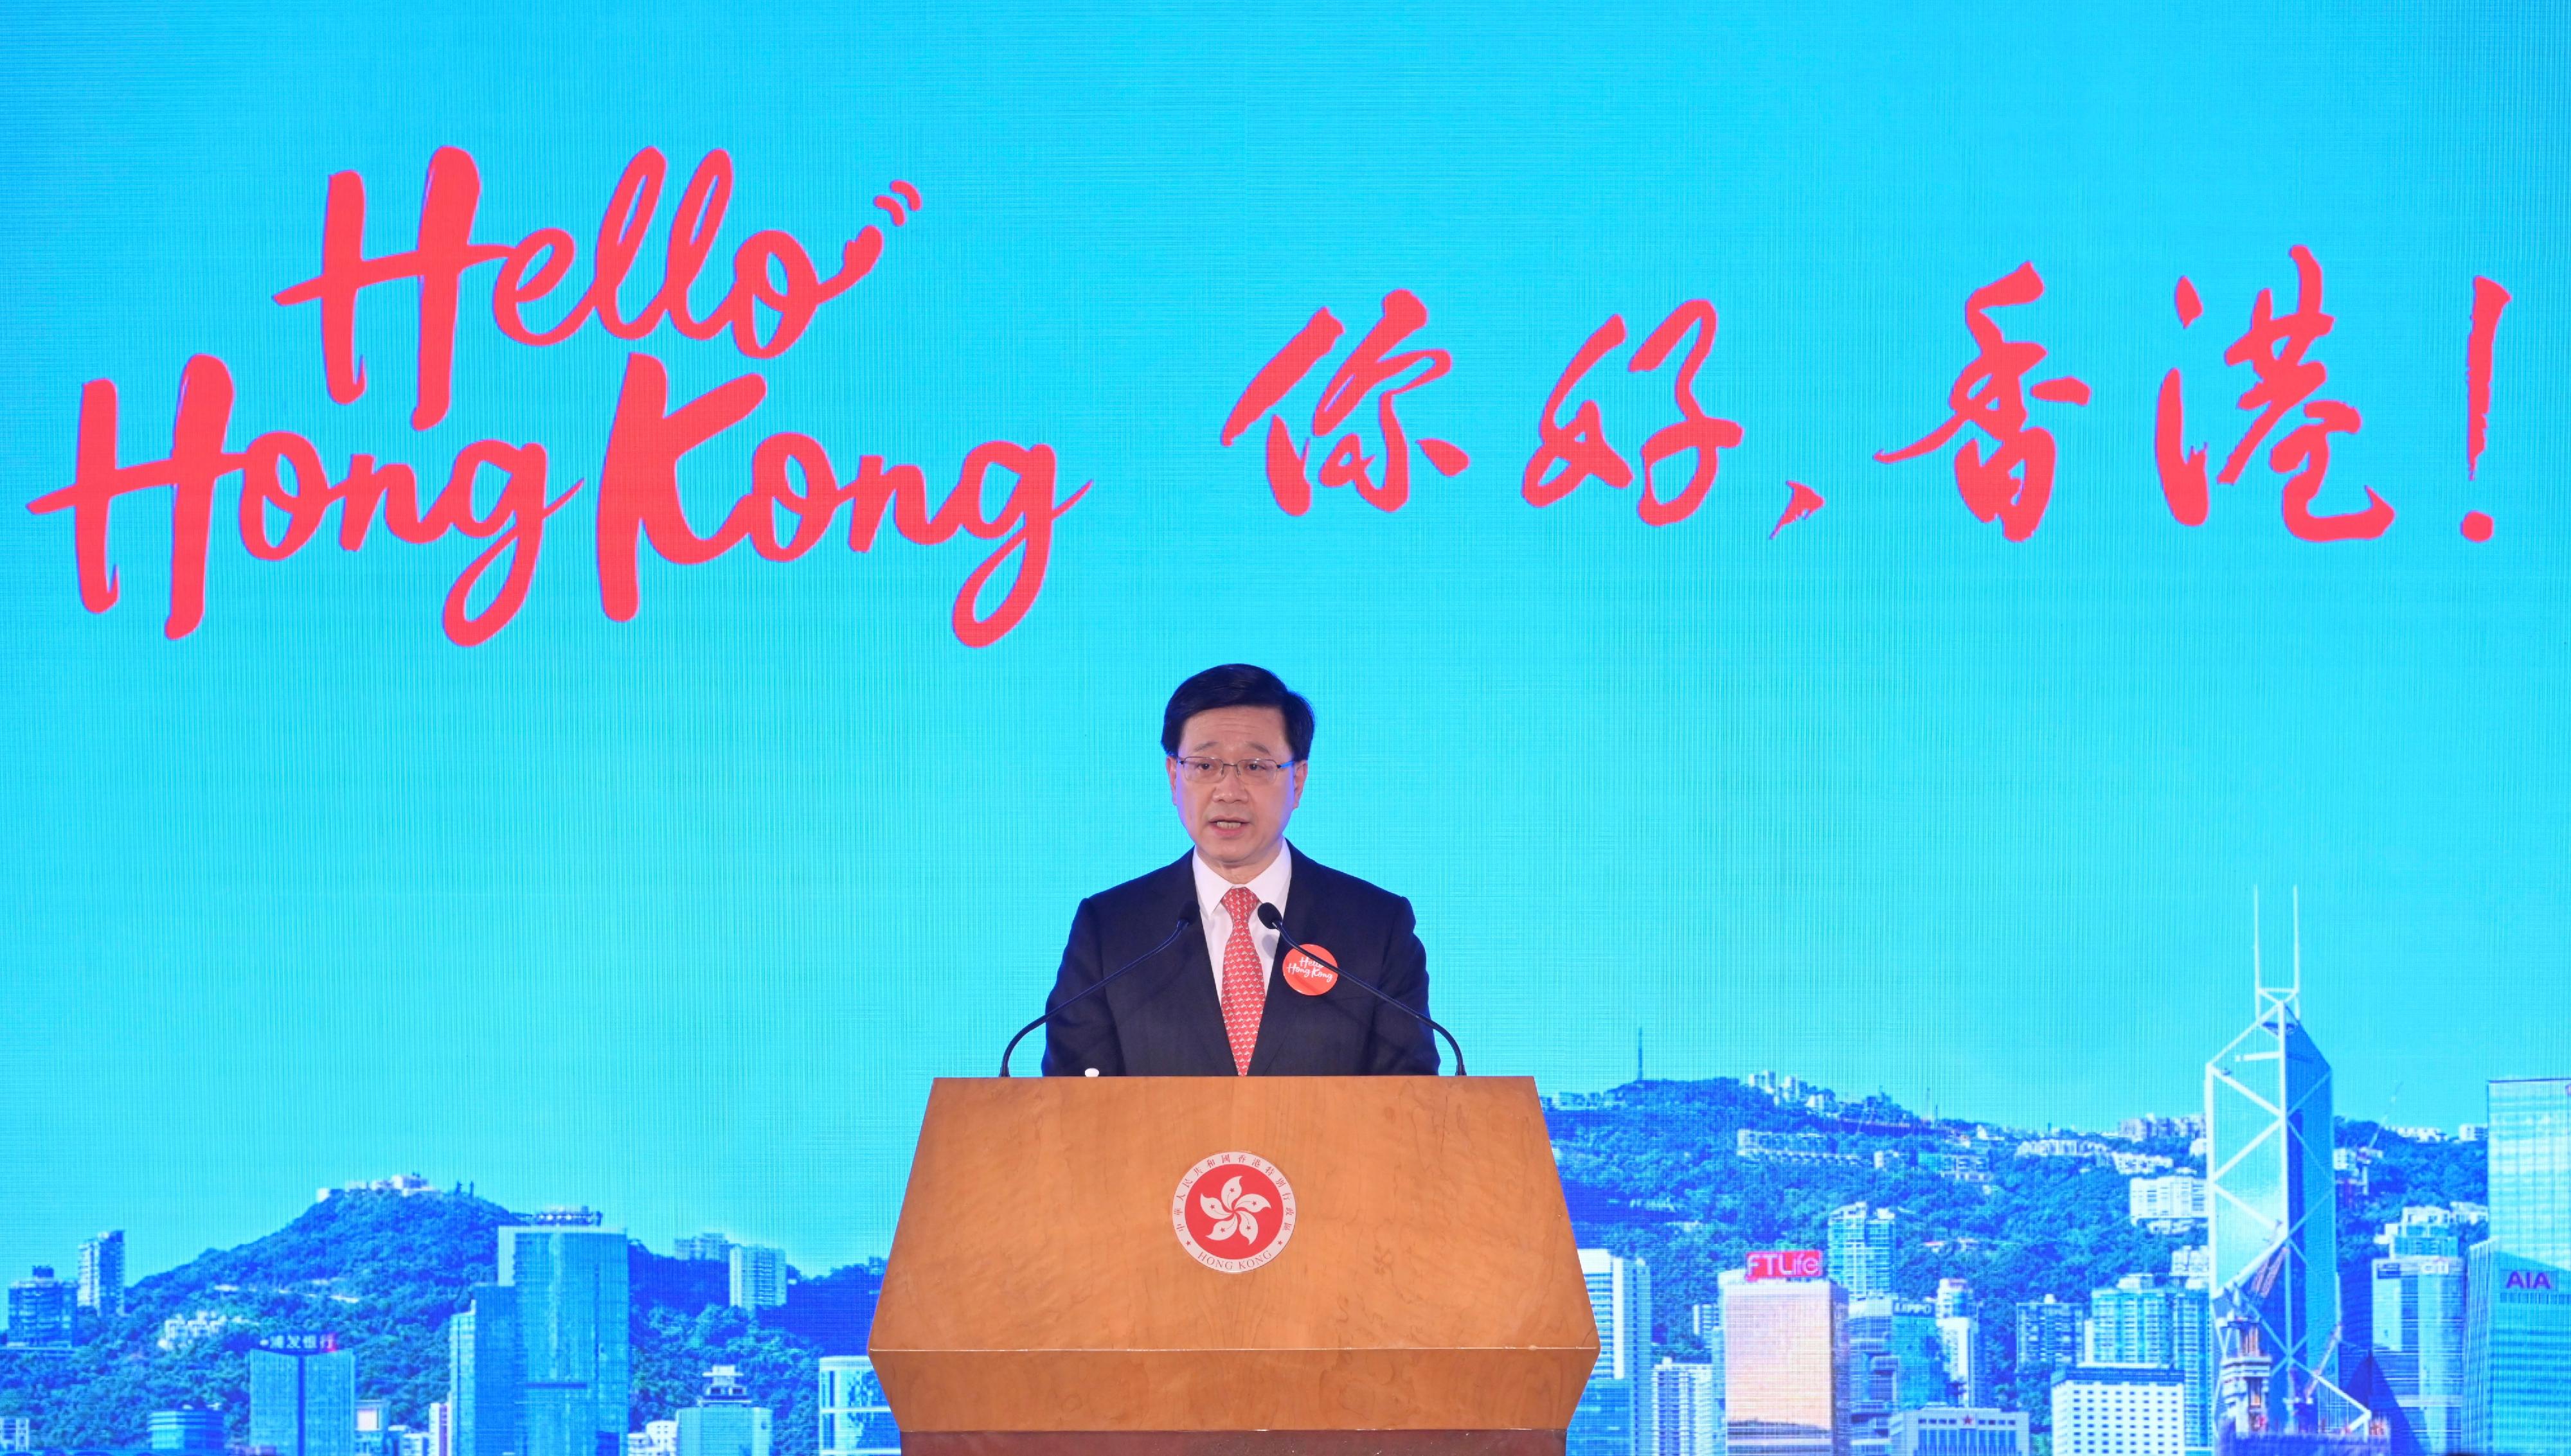 The Chief Executive, Mr John Lee, delivers the opening remarks at the "Hello Hong Kong" Campaign Launch Ceremony today (February 2).